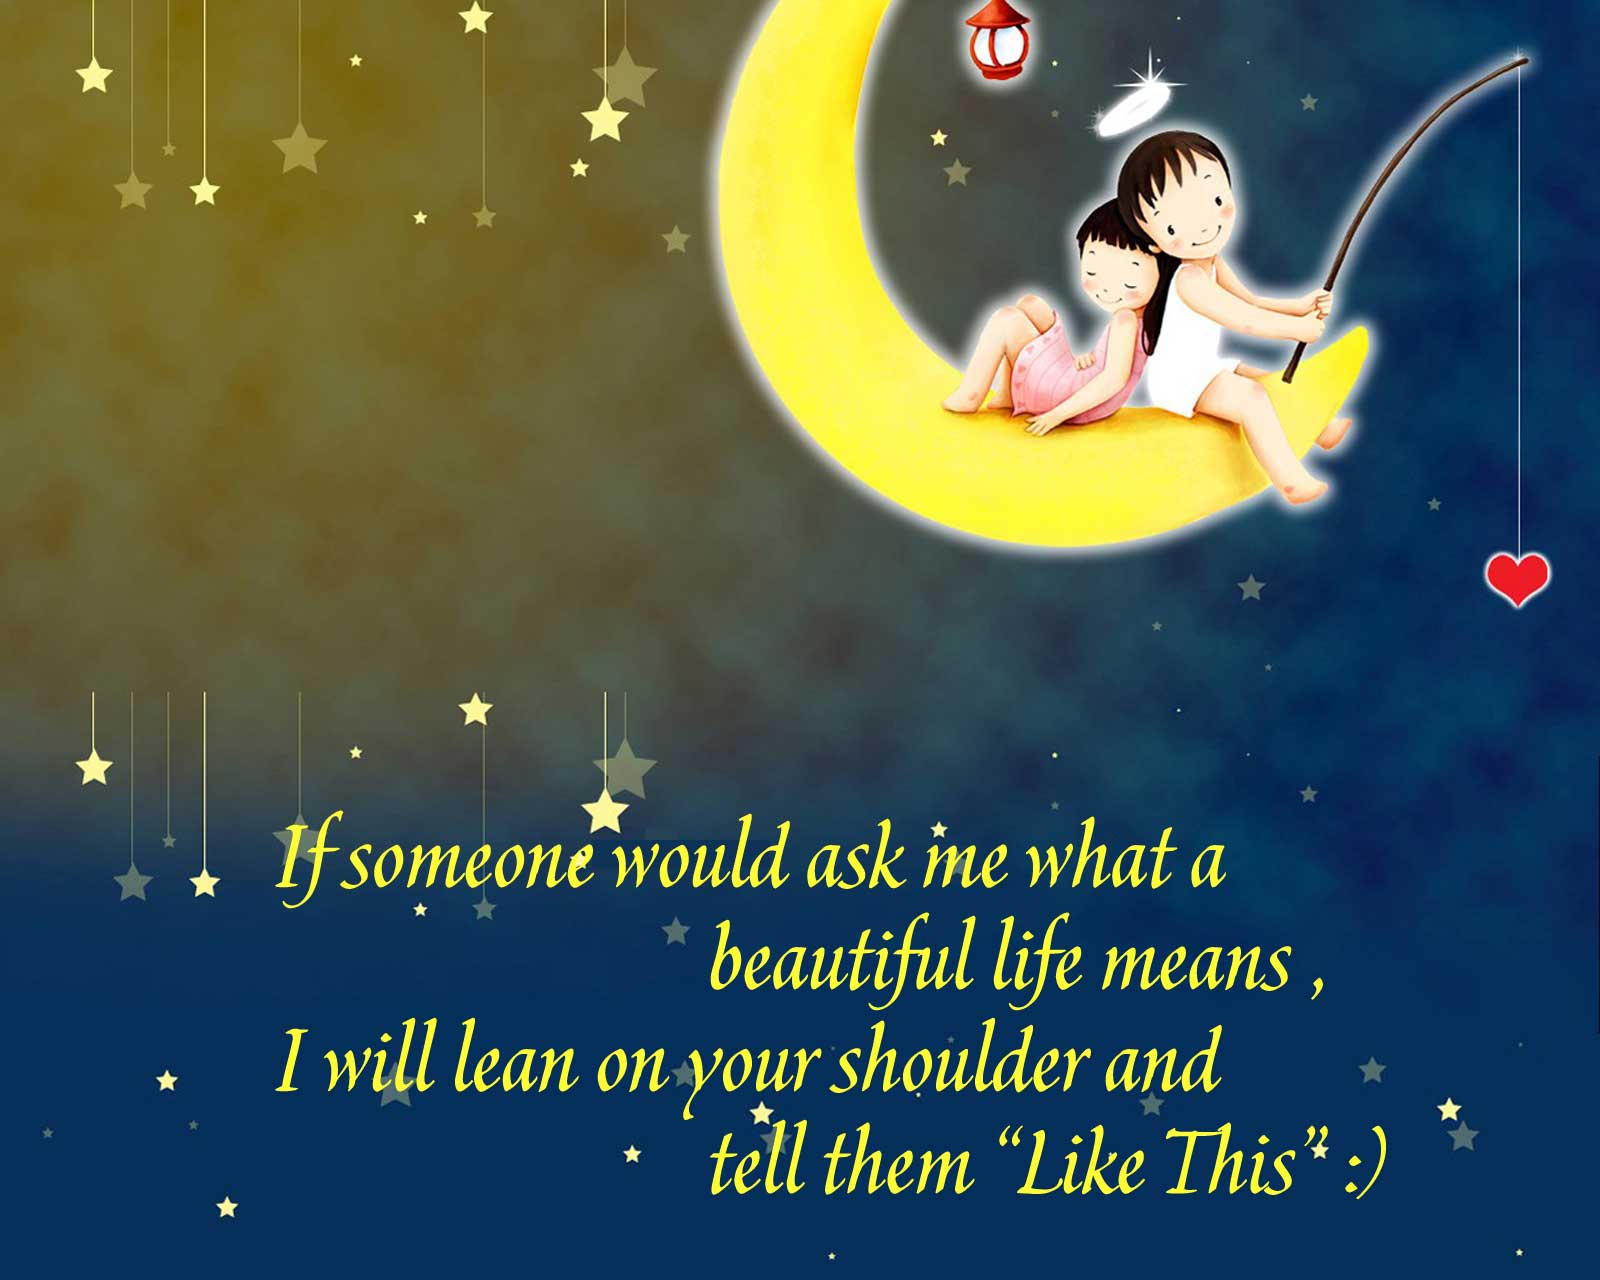 Free Cute Wallpapers With Quotes - Wallpaper Cave